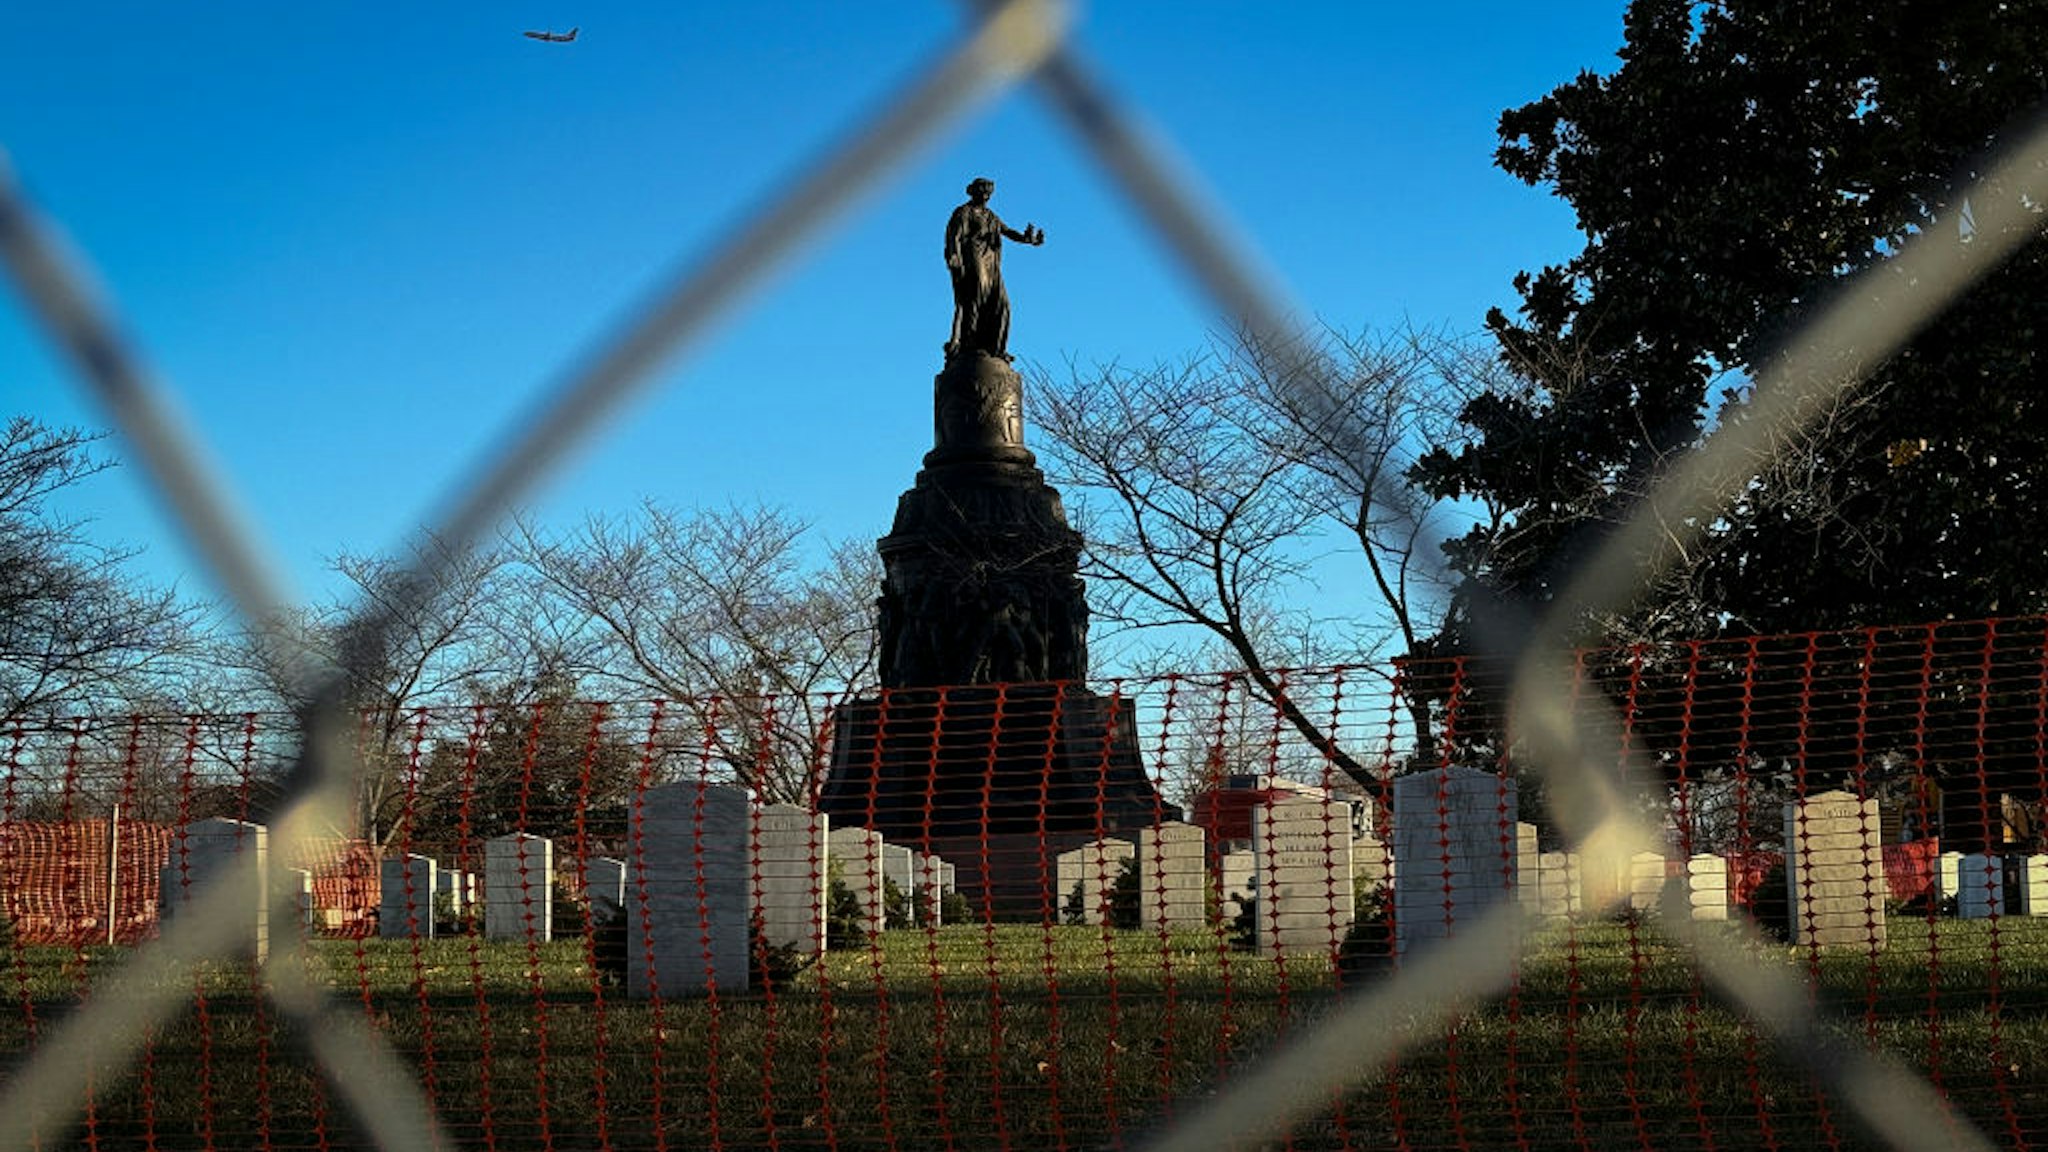 ARLINGTON, VIRGINIA - DECEMBER 19: A memorial to Confederate soldiers at Arlington National Cemetery is shown December 19, 2023 in Arliington, Virginia. A federal judge has temporarily barred the planned removal of the memorial after a lawsuit filed against the Department of Defense that seeks to restrain the removal of the memorial.